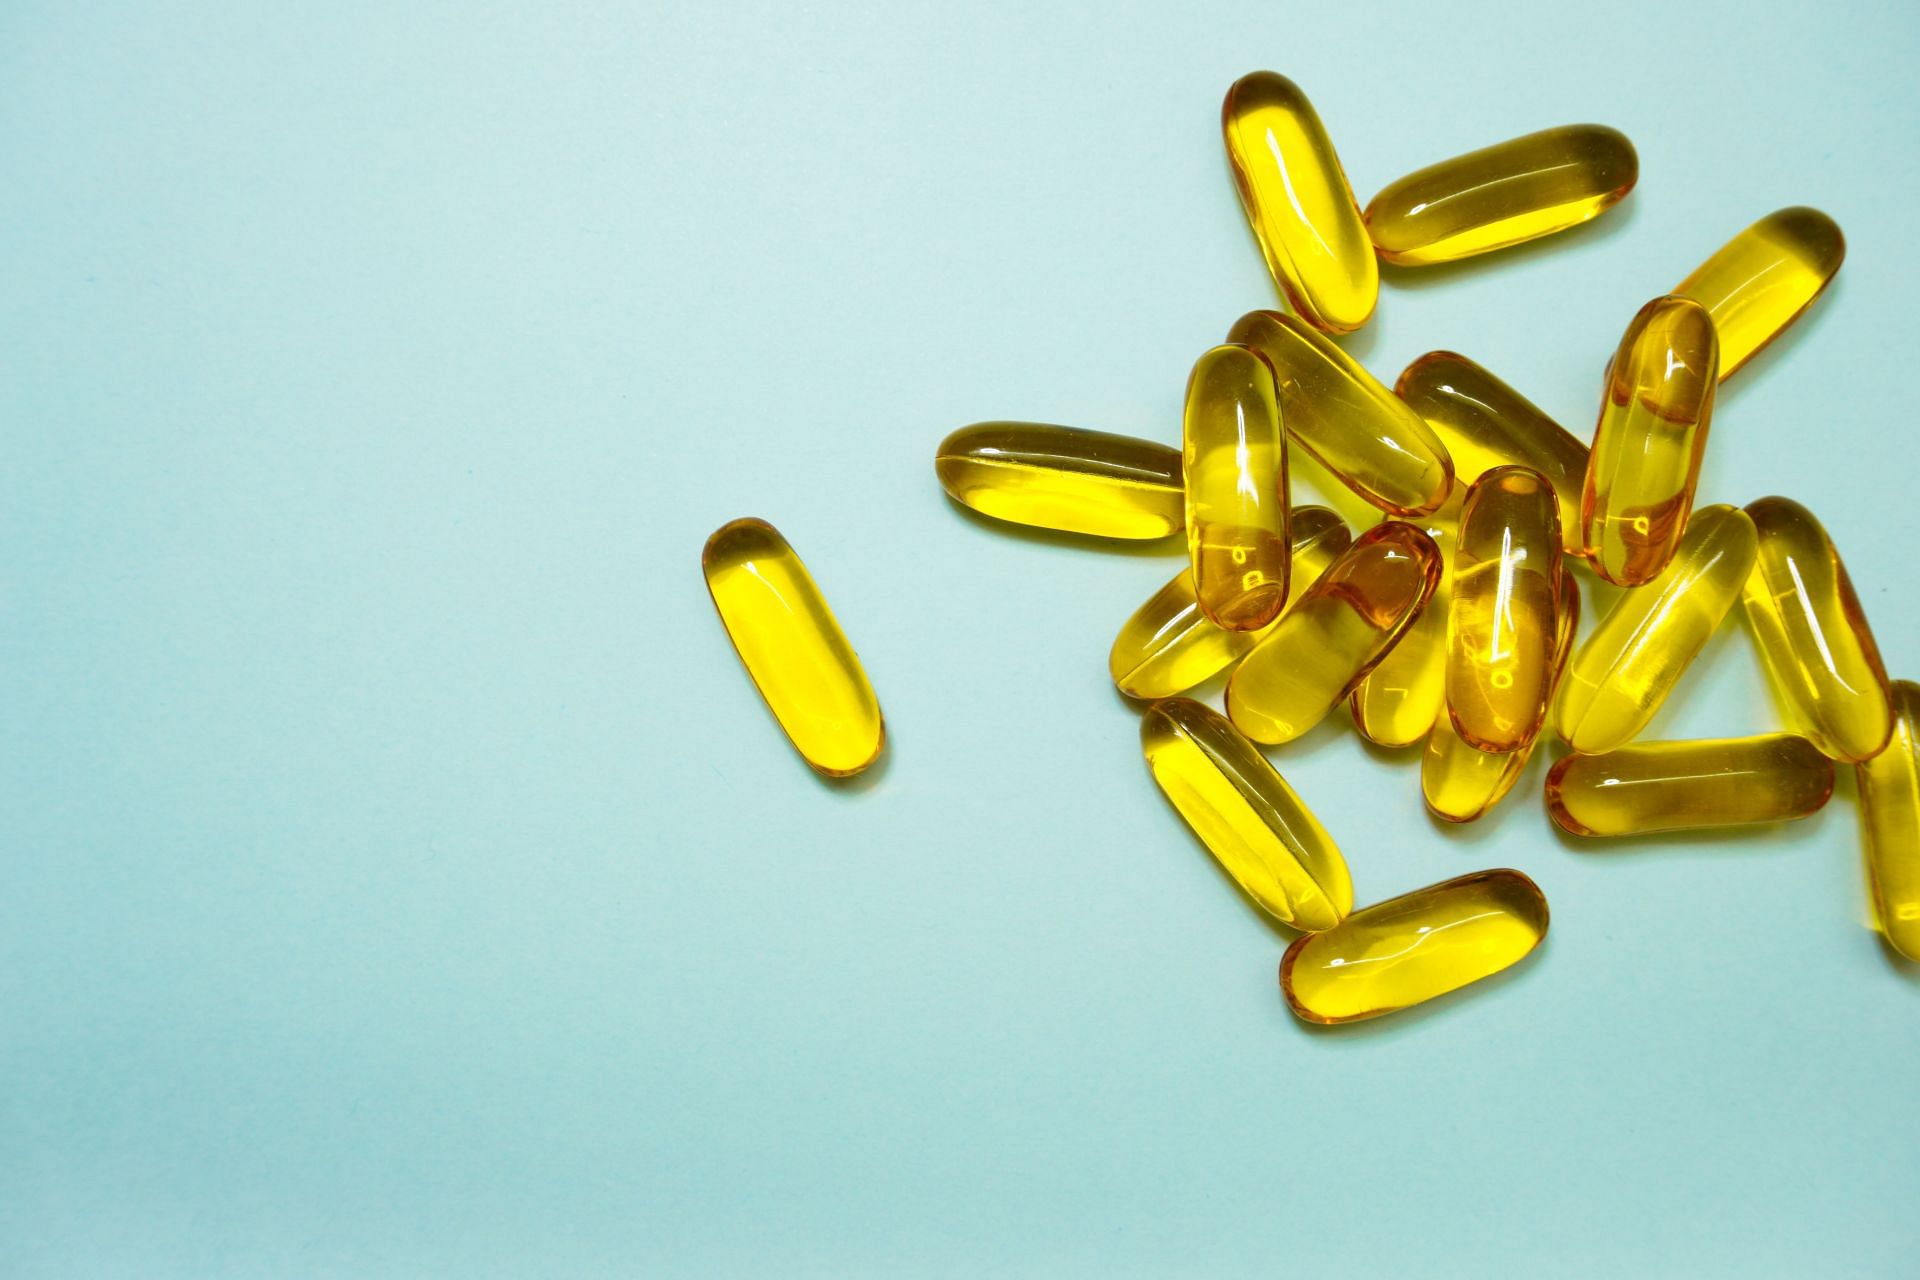 Benefits of cod liver oil include reduced joint pain. (Image via Unsplash/Leohoho)